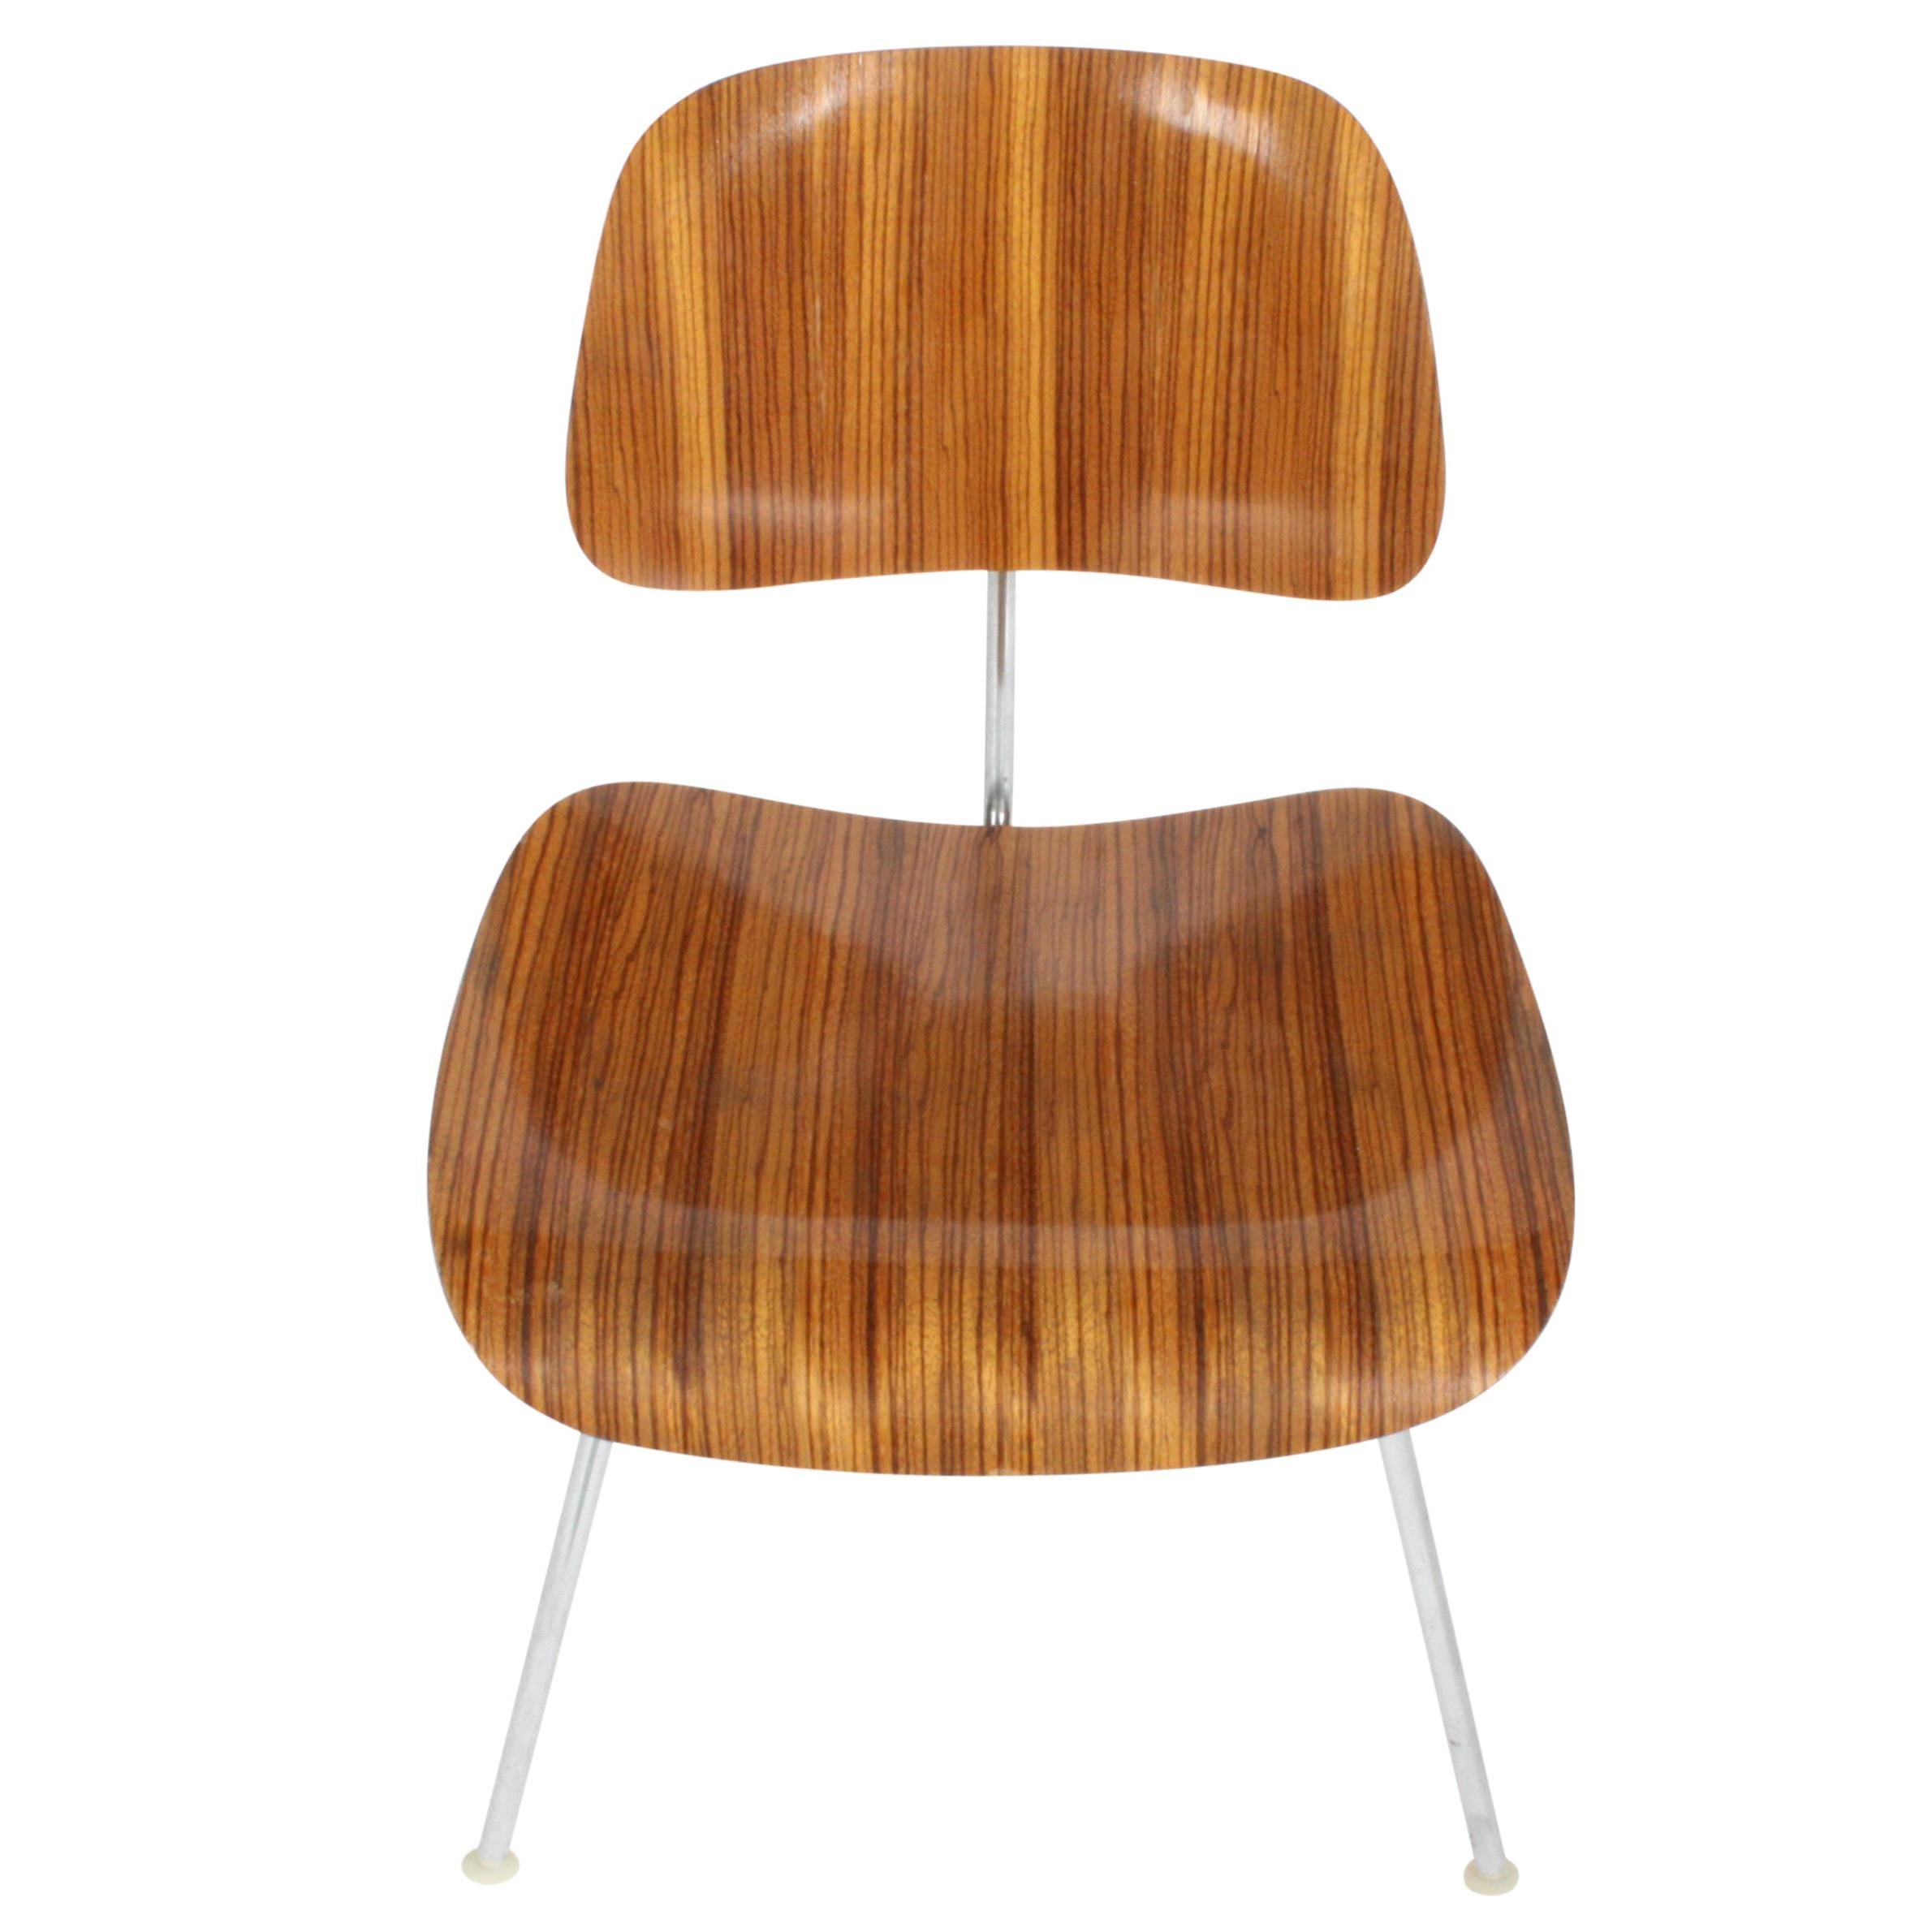 Charles Eames for Herman Miller Zebrawood DCM Chairs, Rare